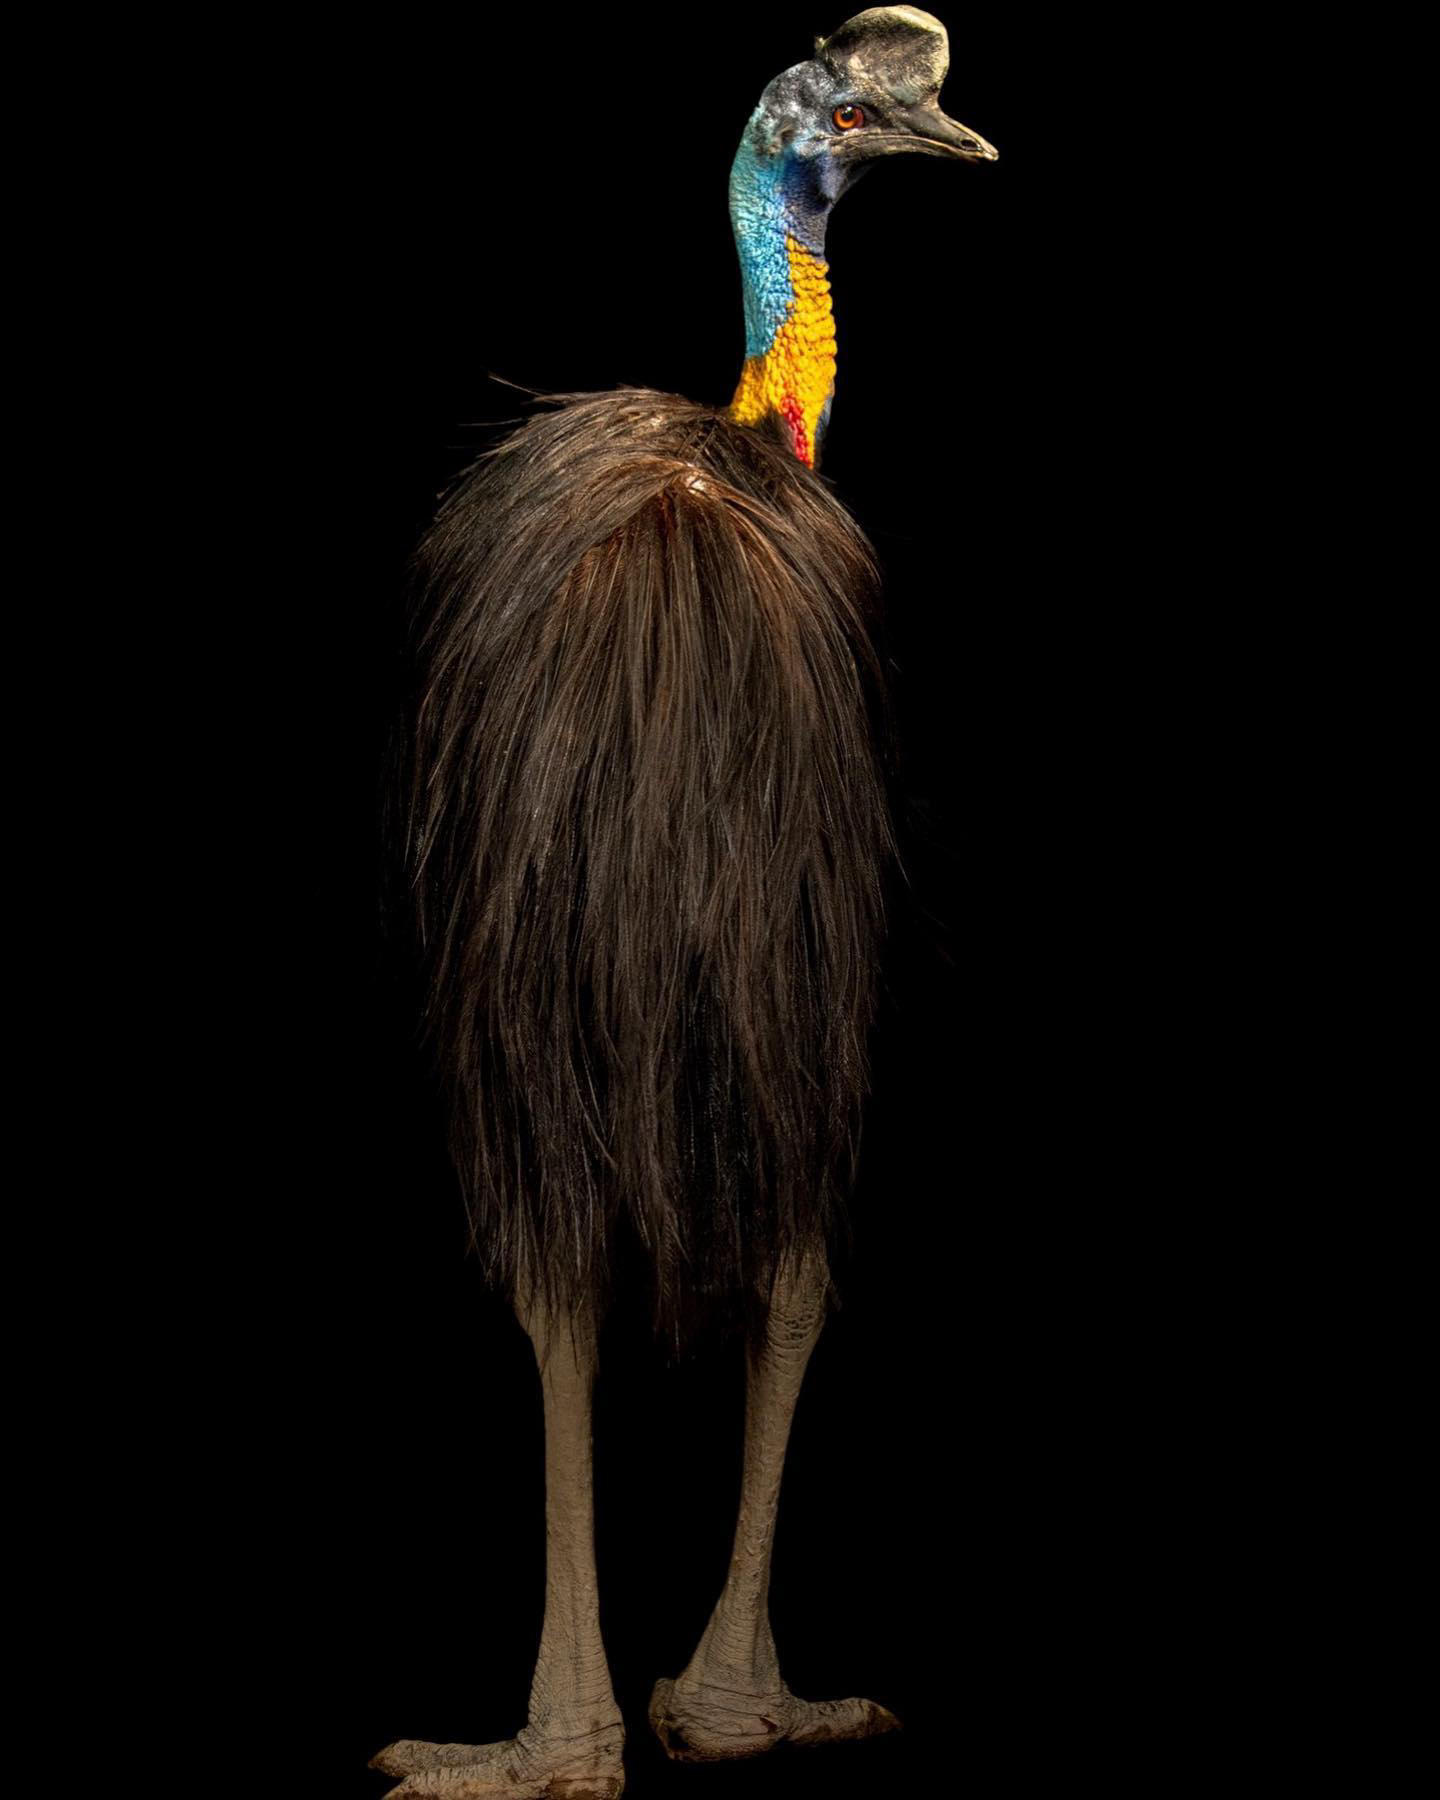 image  1 Joel Sartore- Photo Ark - Found only in New Guinea, single-wattled cassowaries play a critical role